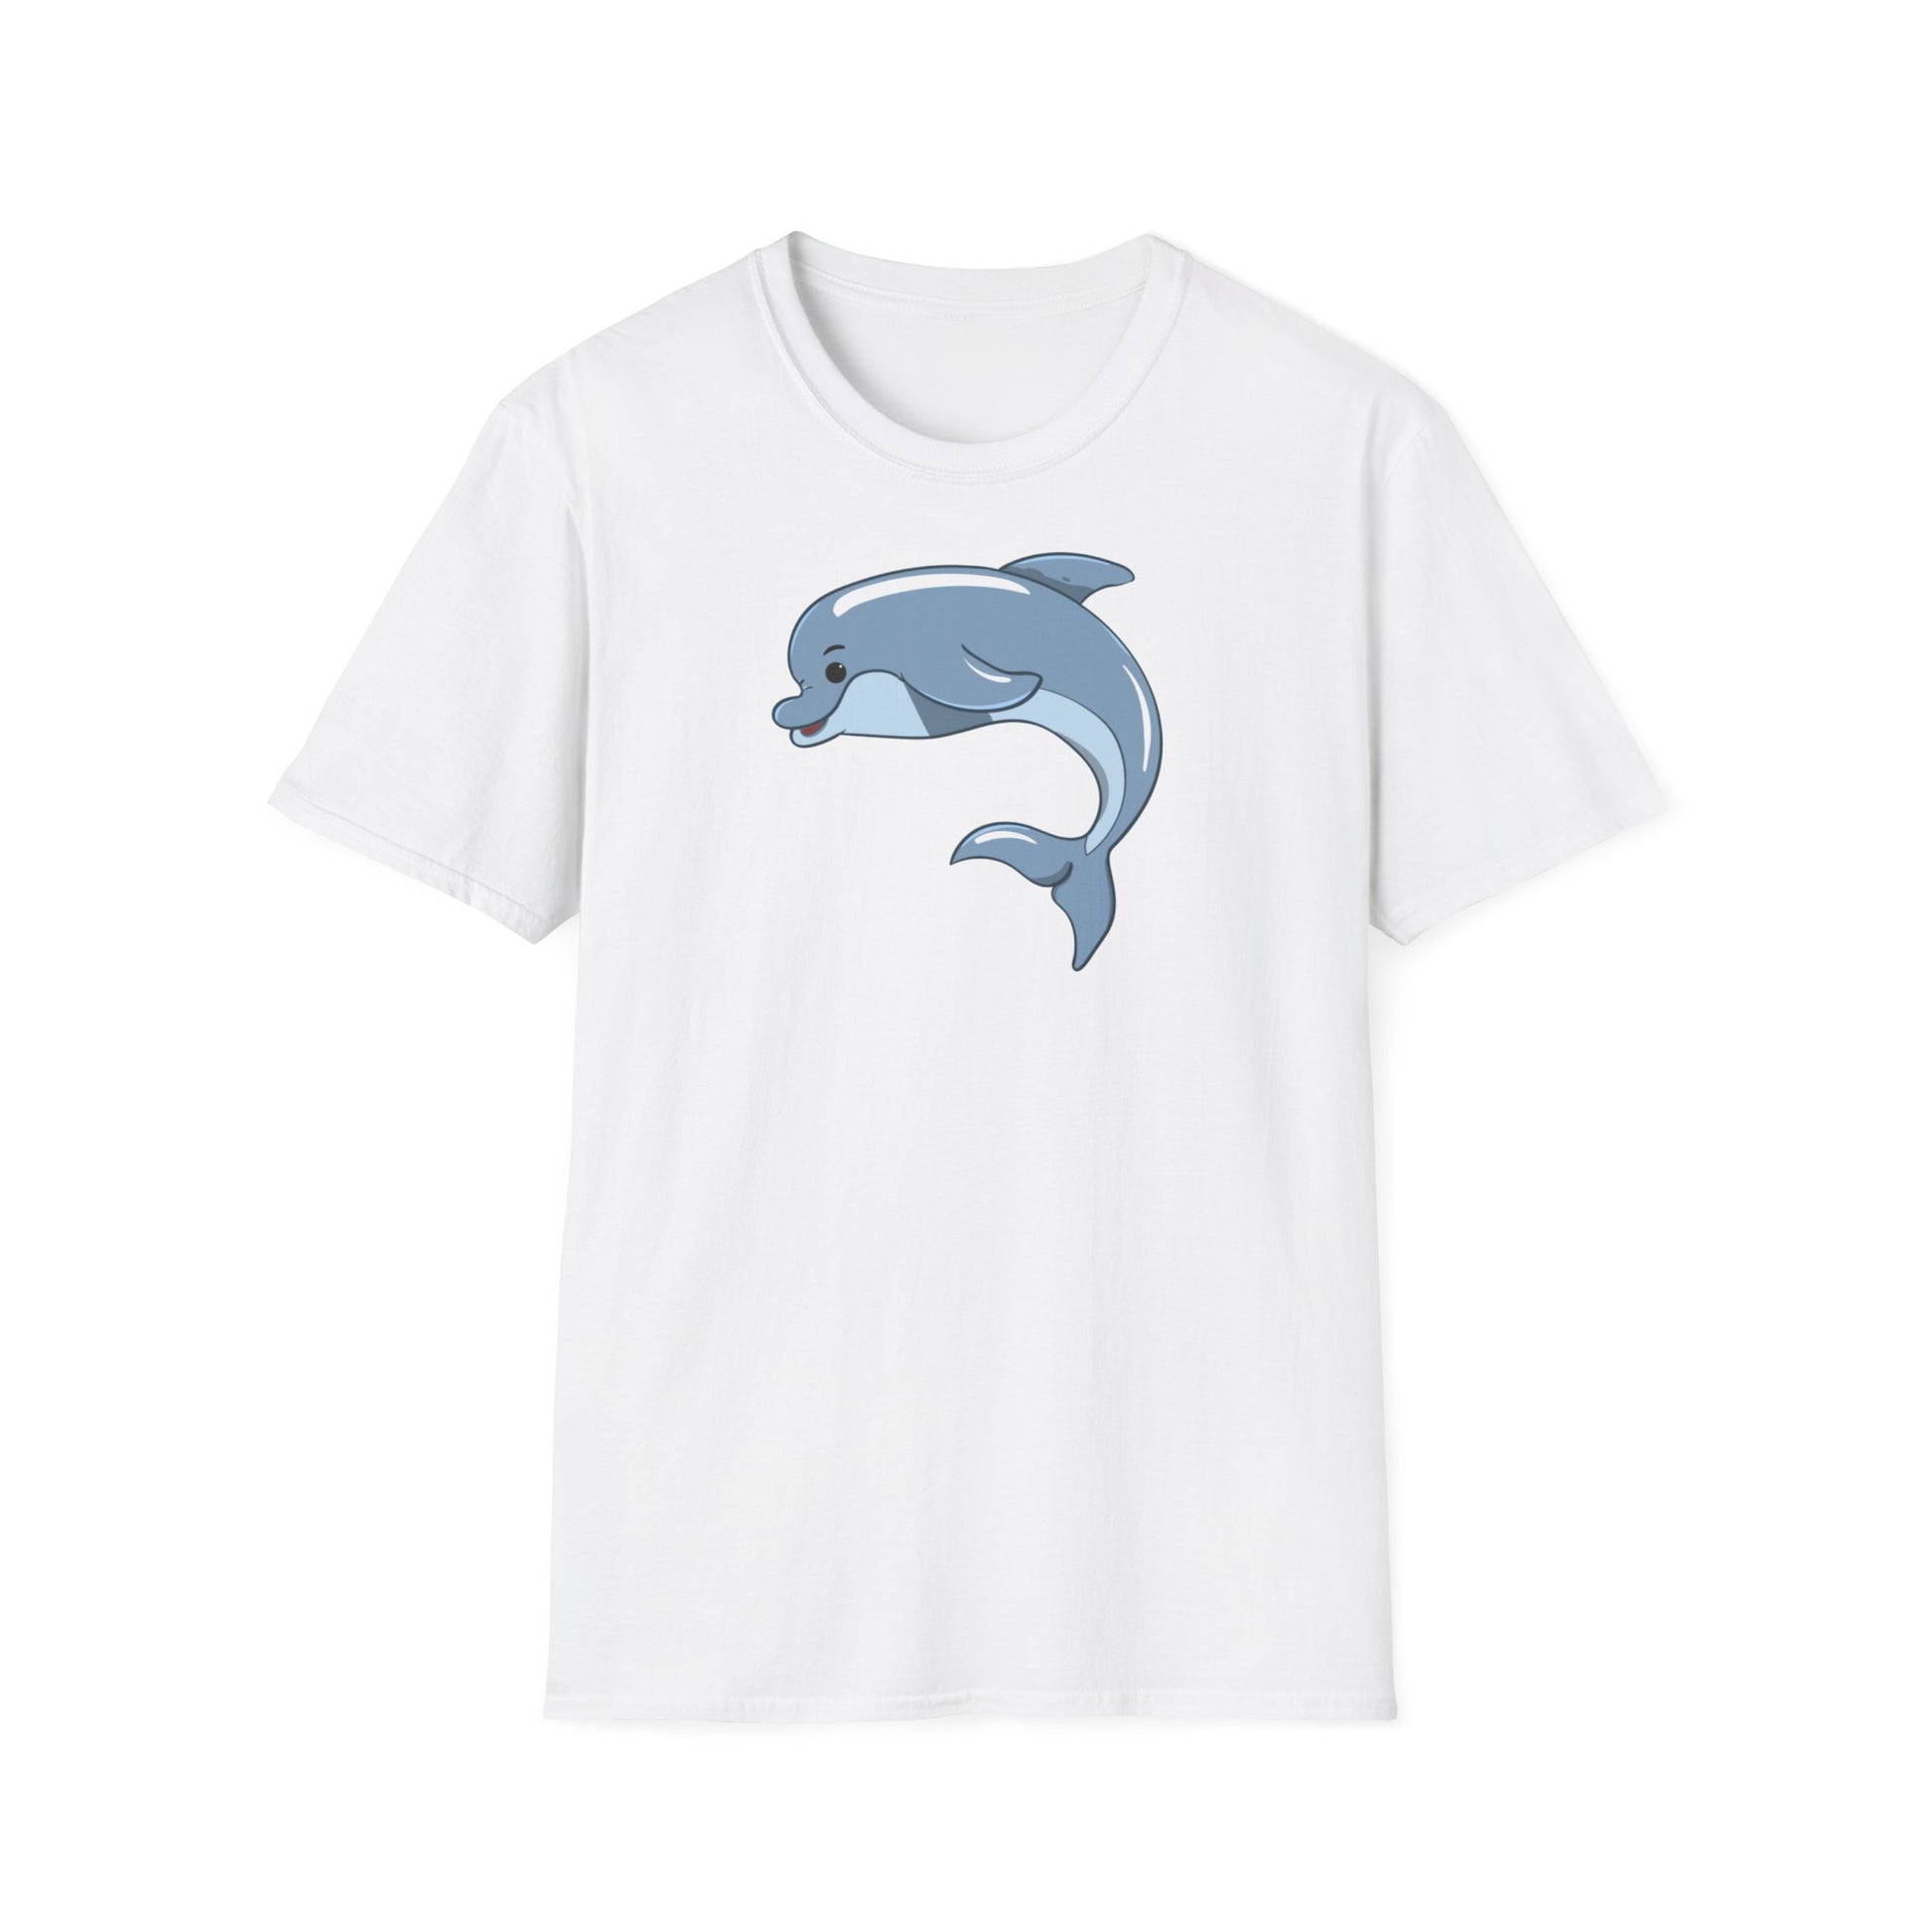 A white t-shirt with a design of a cute cartoon bottlenose dolphin